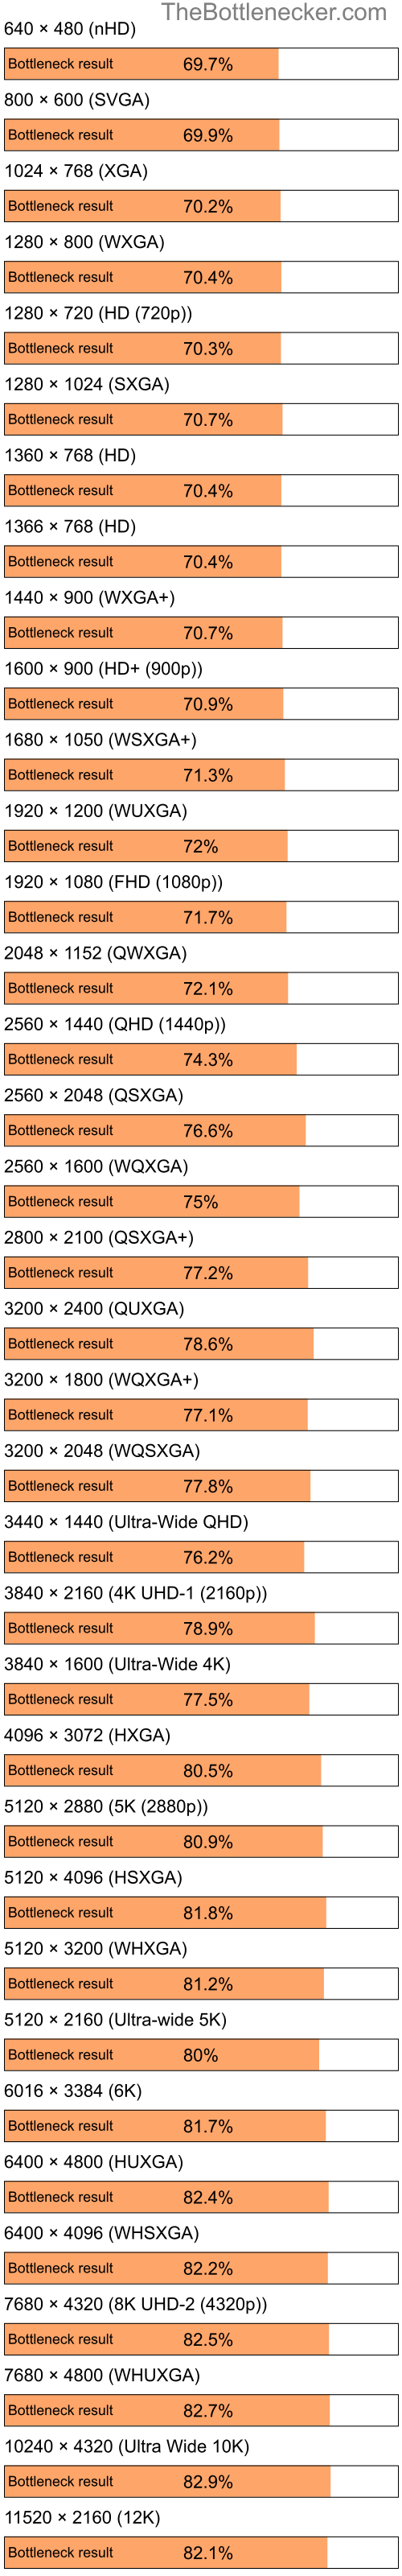 Bottleneck results by resolution for Intel Pentium 4 and NVIDIA GeForce 8200M G in General Tasks